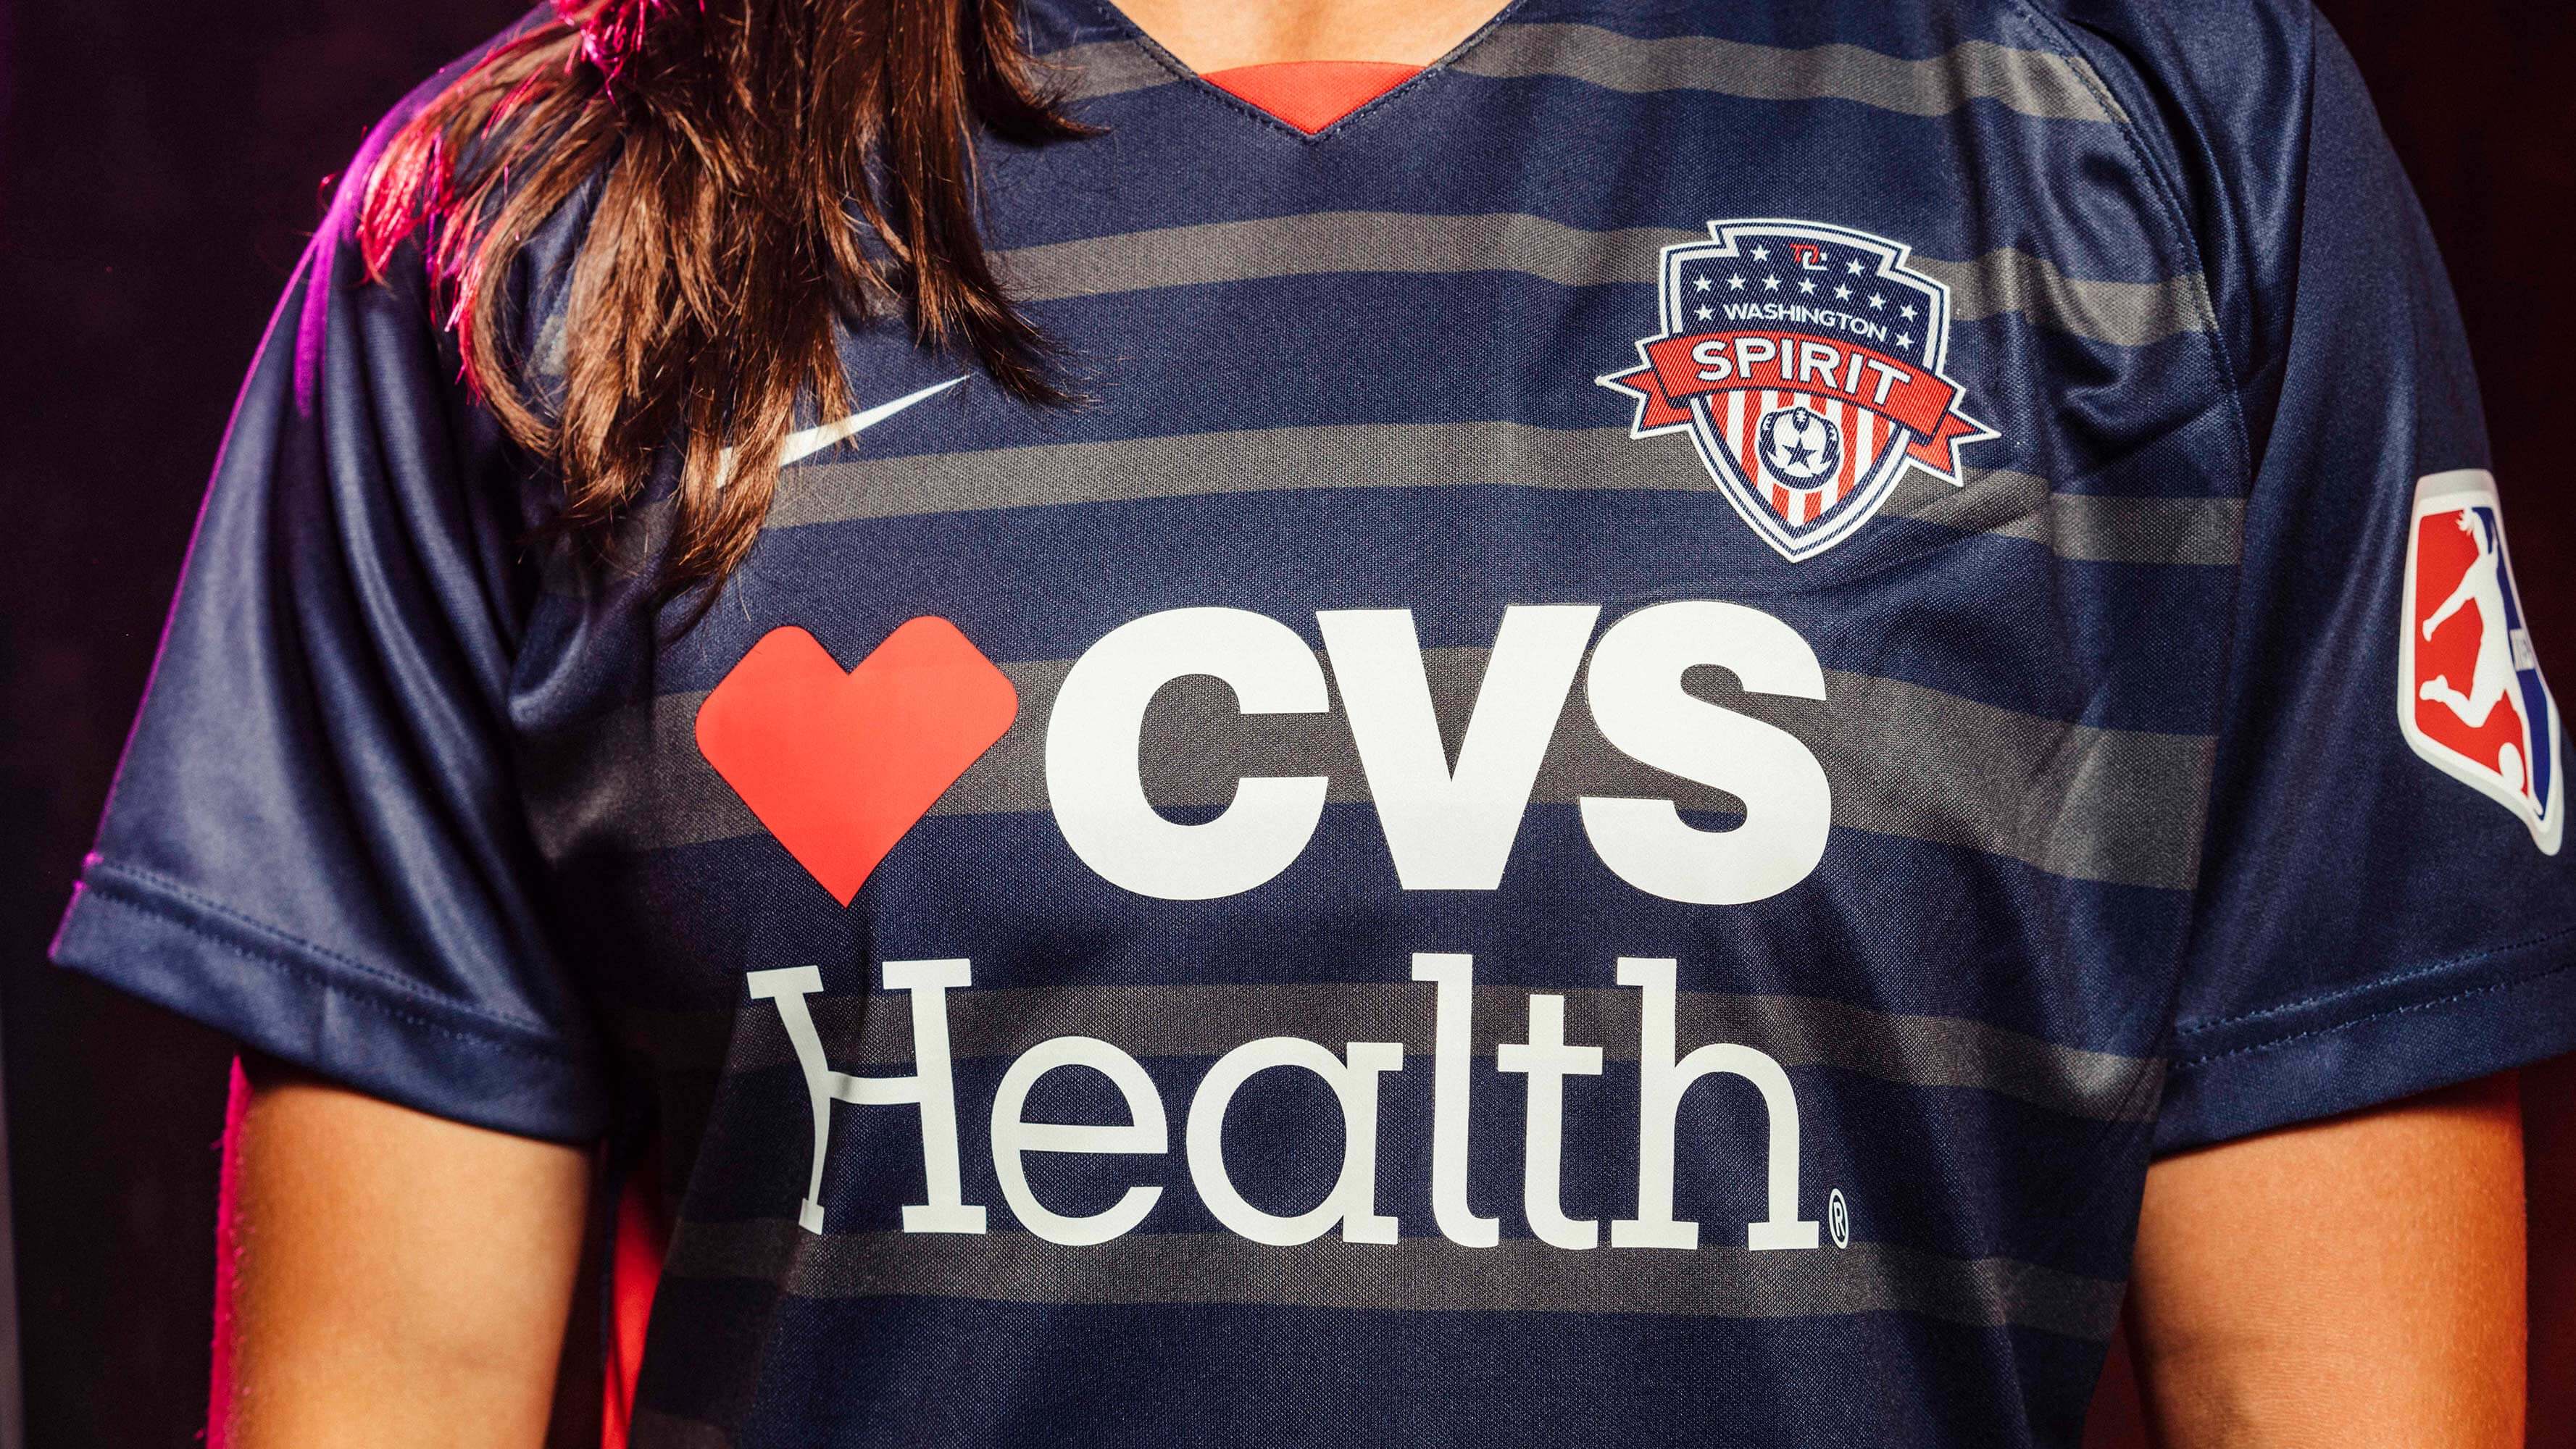 CVS Health named 'Presenting and Official Health and Wellness Sponsor' for  the Washington Spirit professional soccer team